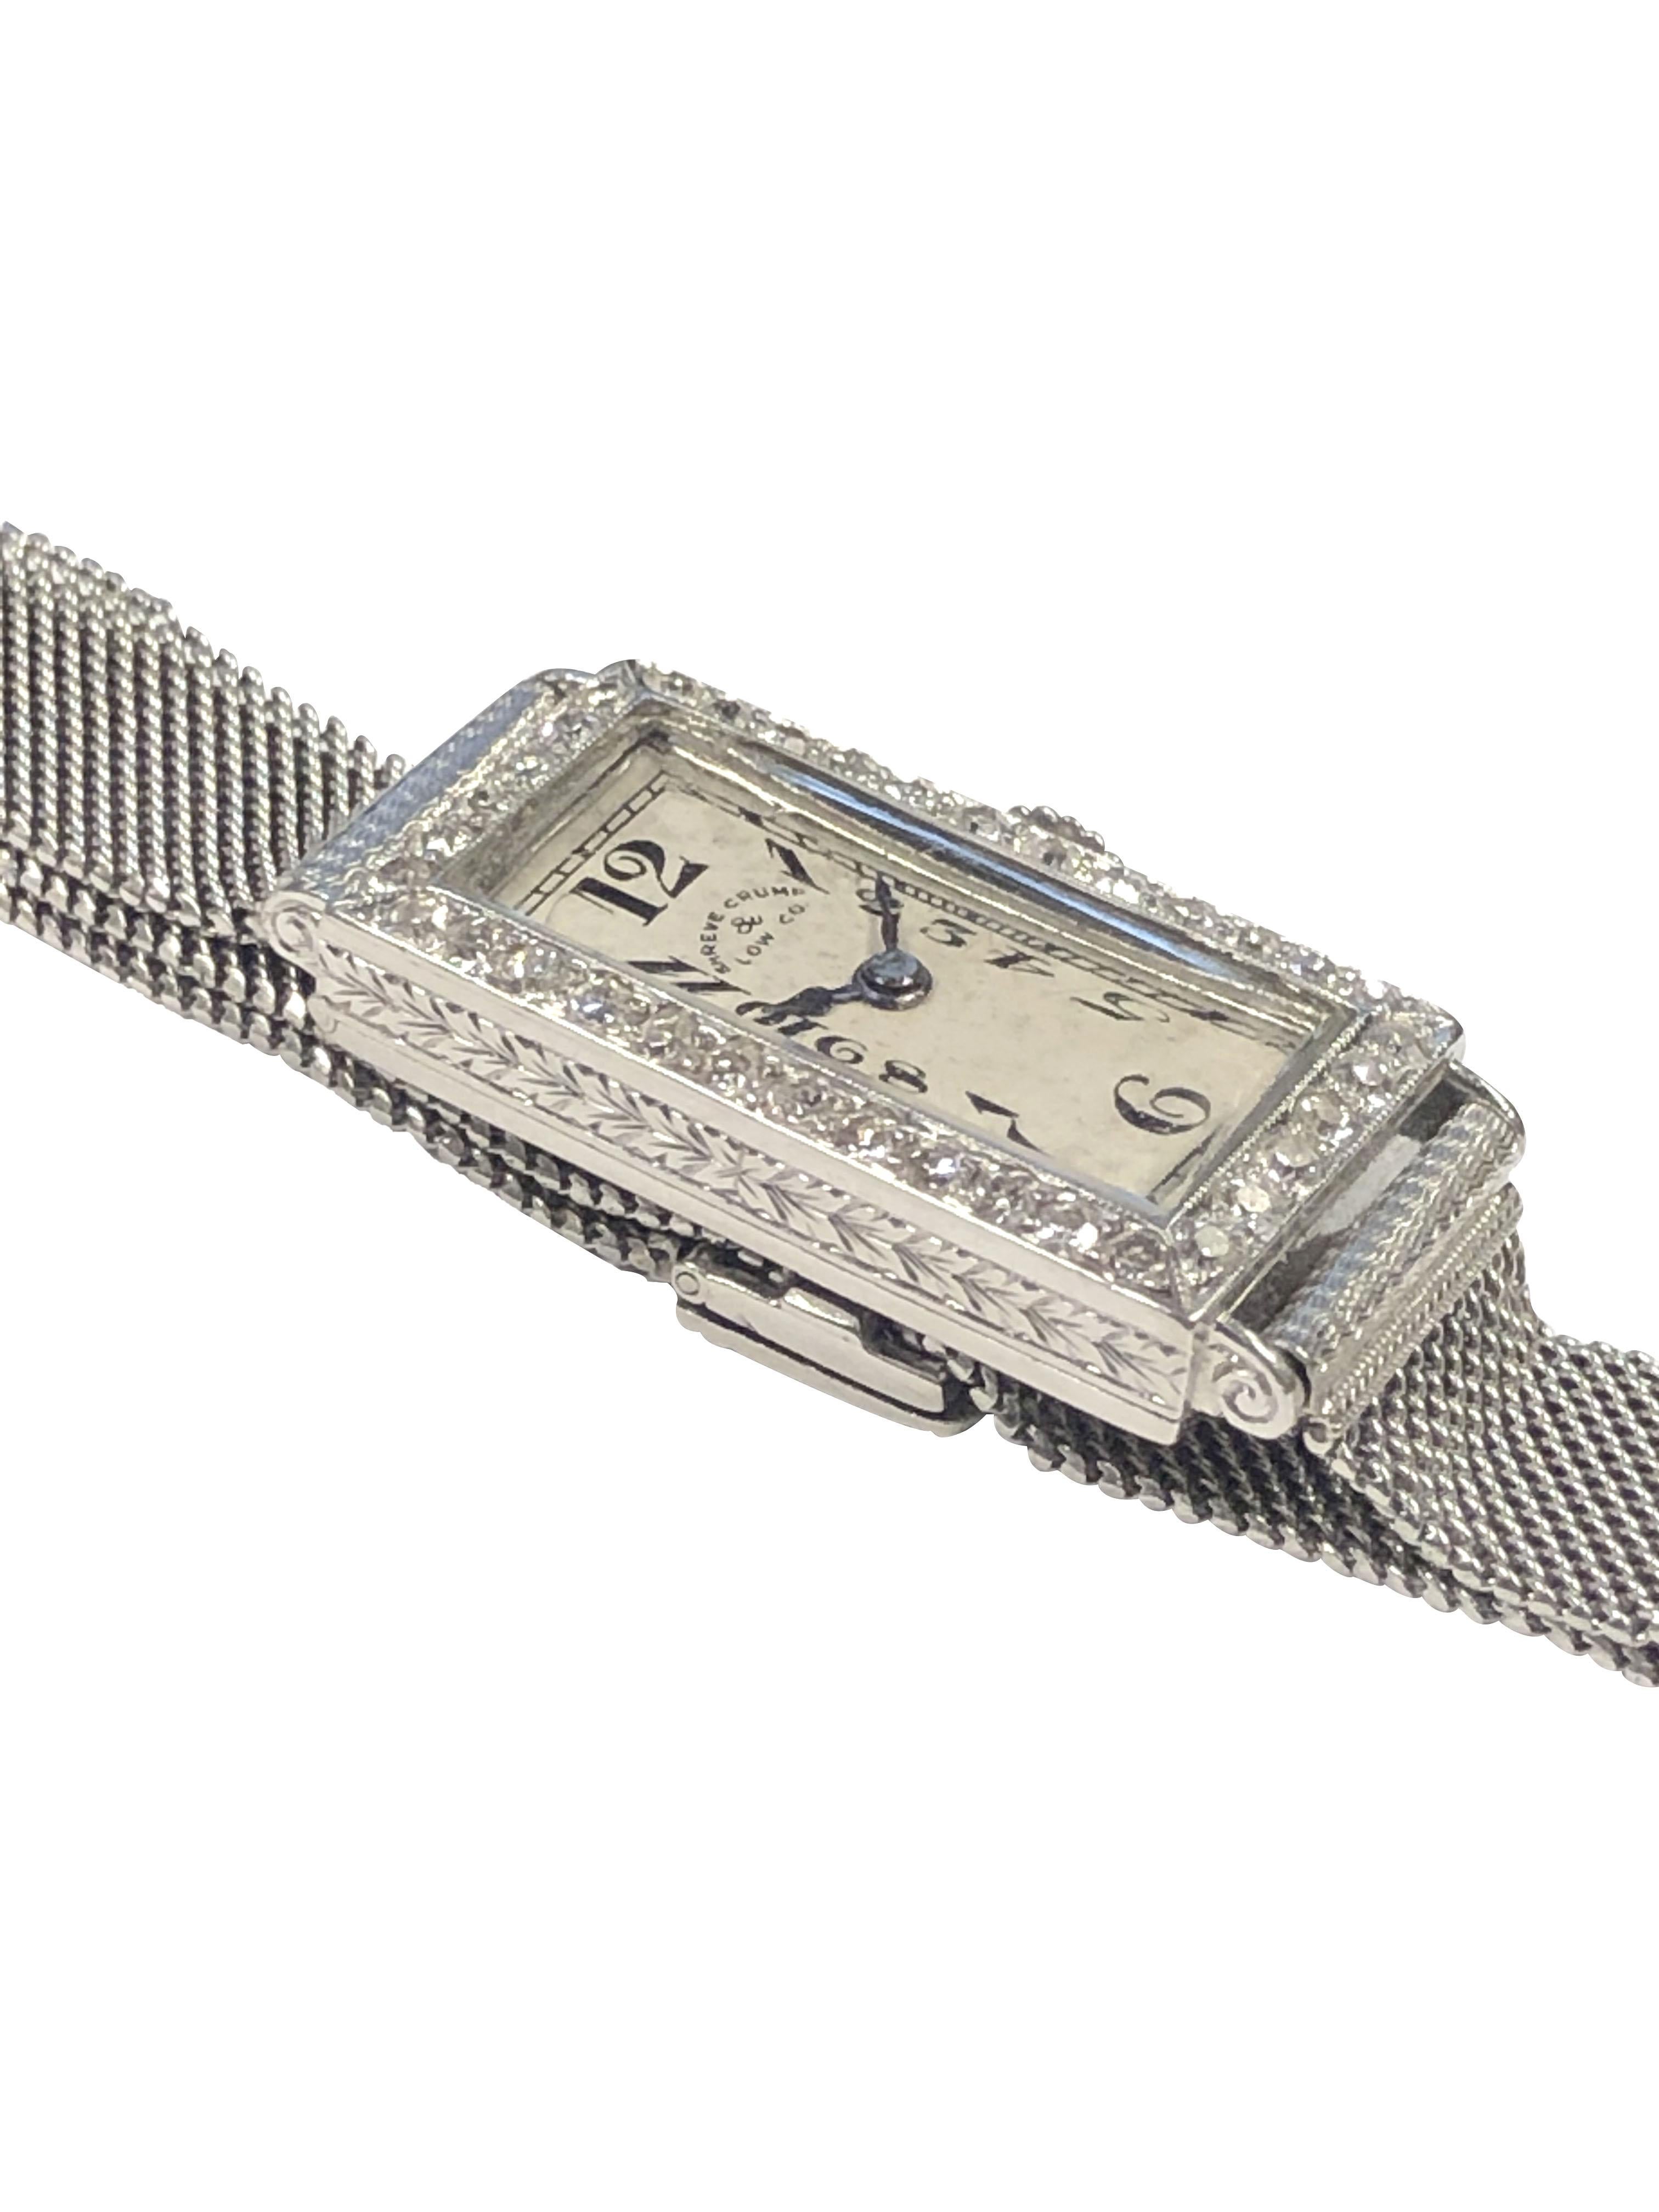 Circa 1920s Patek Philippe Ladies Bracelet Wrist Watch retailed by Shreve Crump & Low, 24 X 13 M.M. Platinum case set with Old cut Diamonds. Hand Engraved design work on the case sides and case back. 18 Jewel Patek Philippe Mechanical, Manual wind